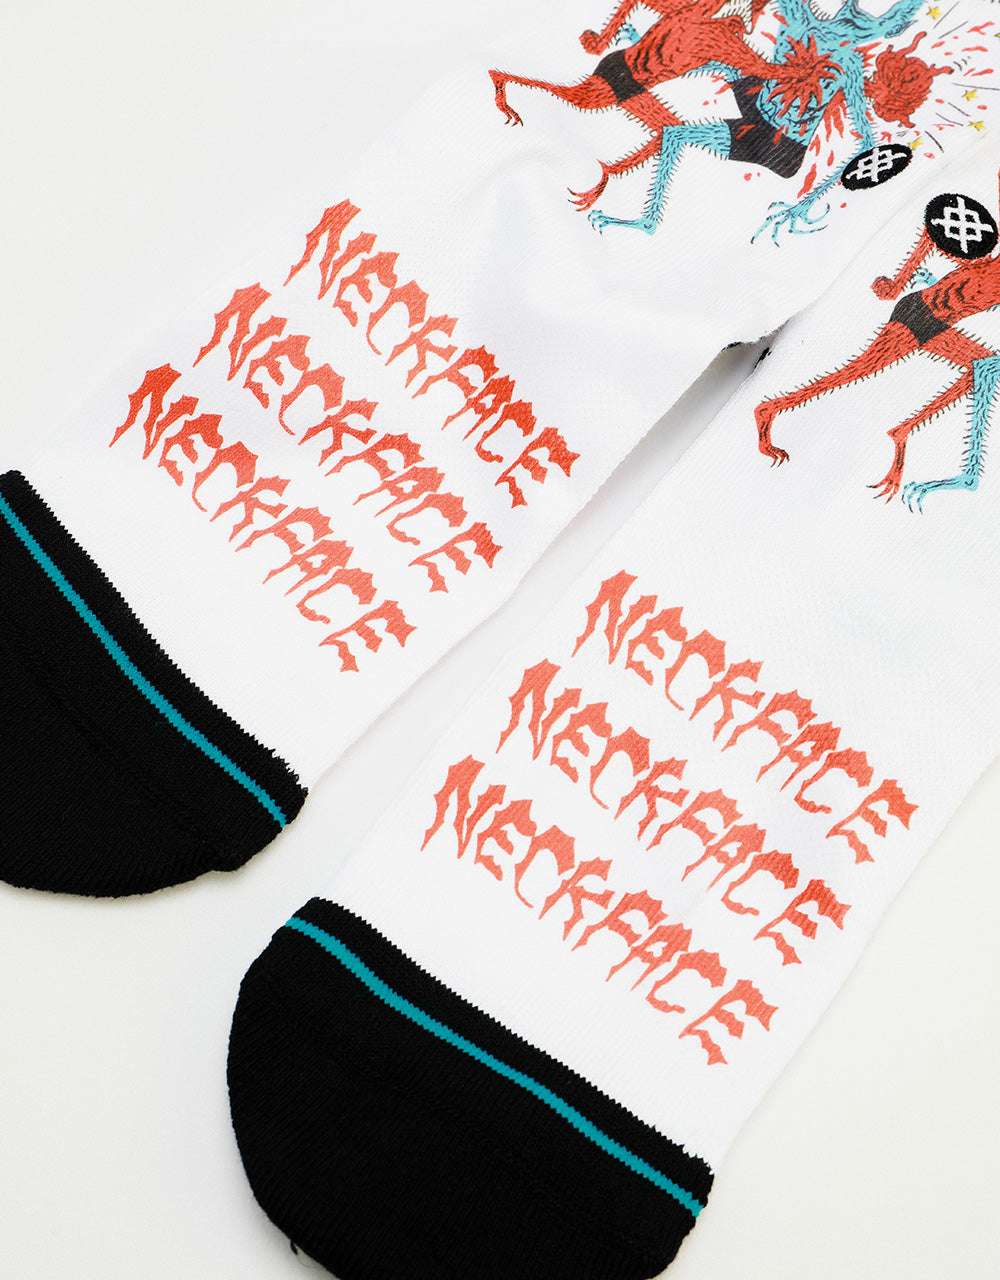 Stance x Neckface Have A Heart Crew Socks - White